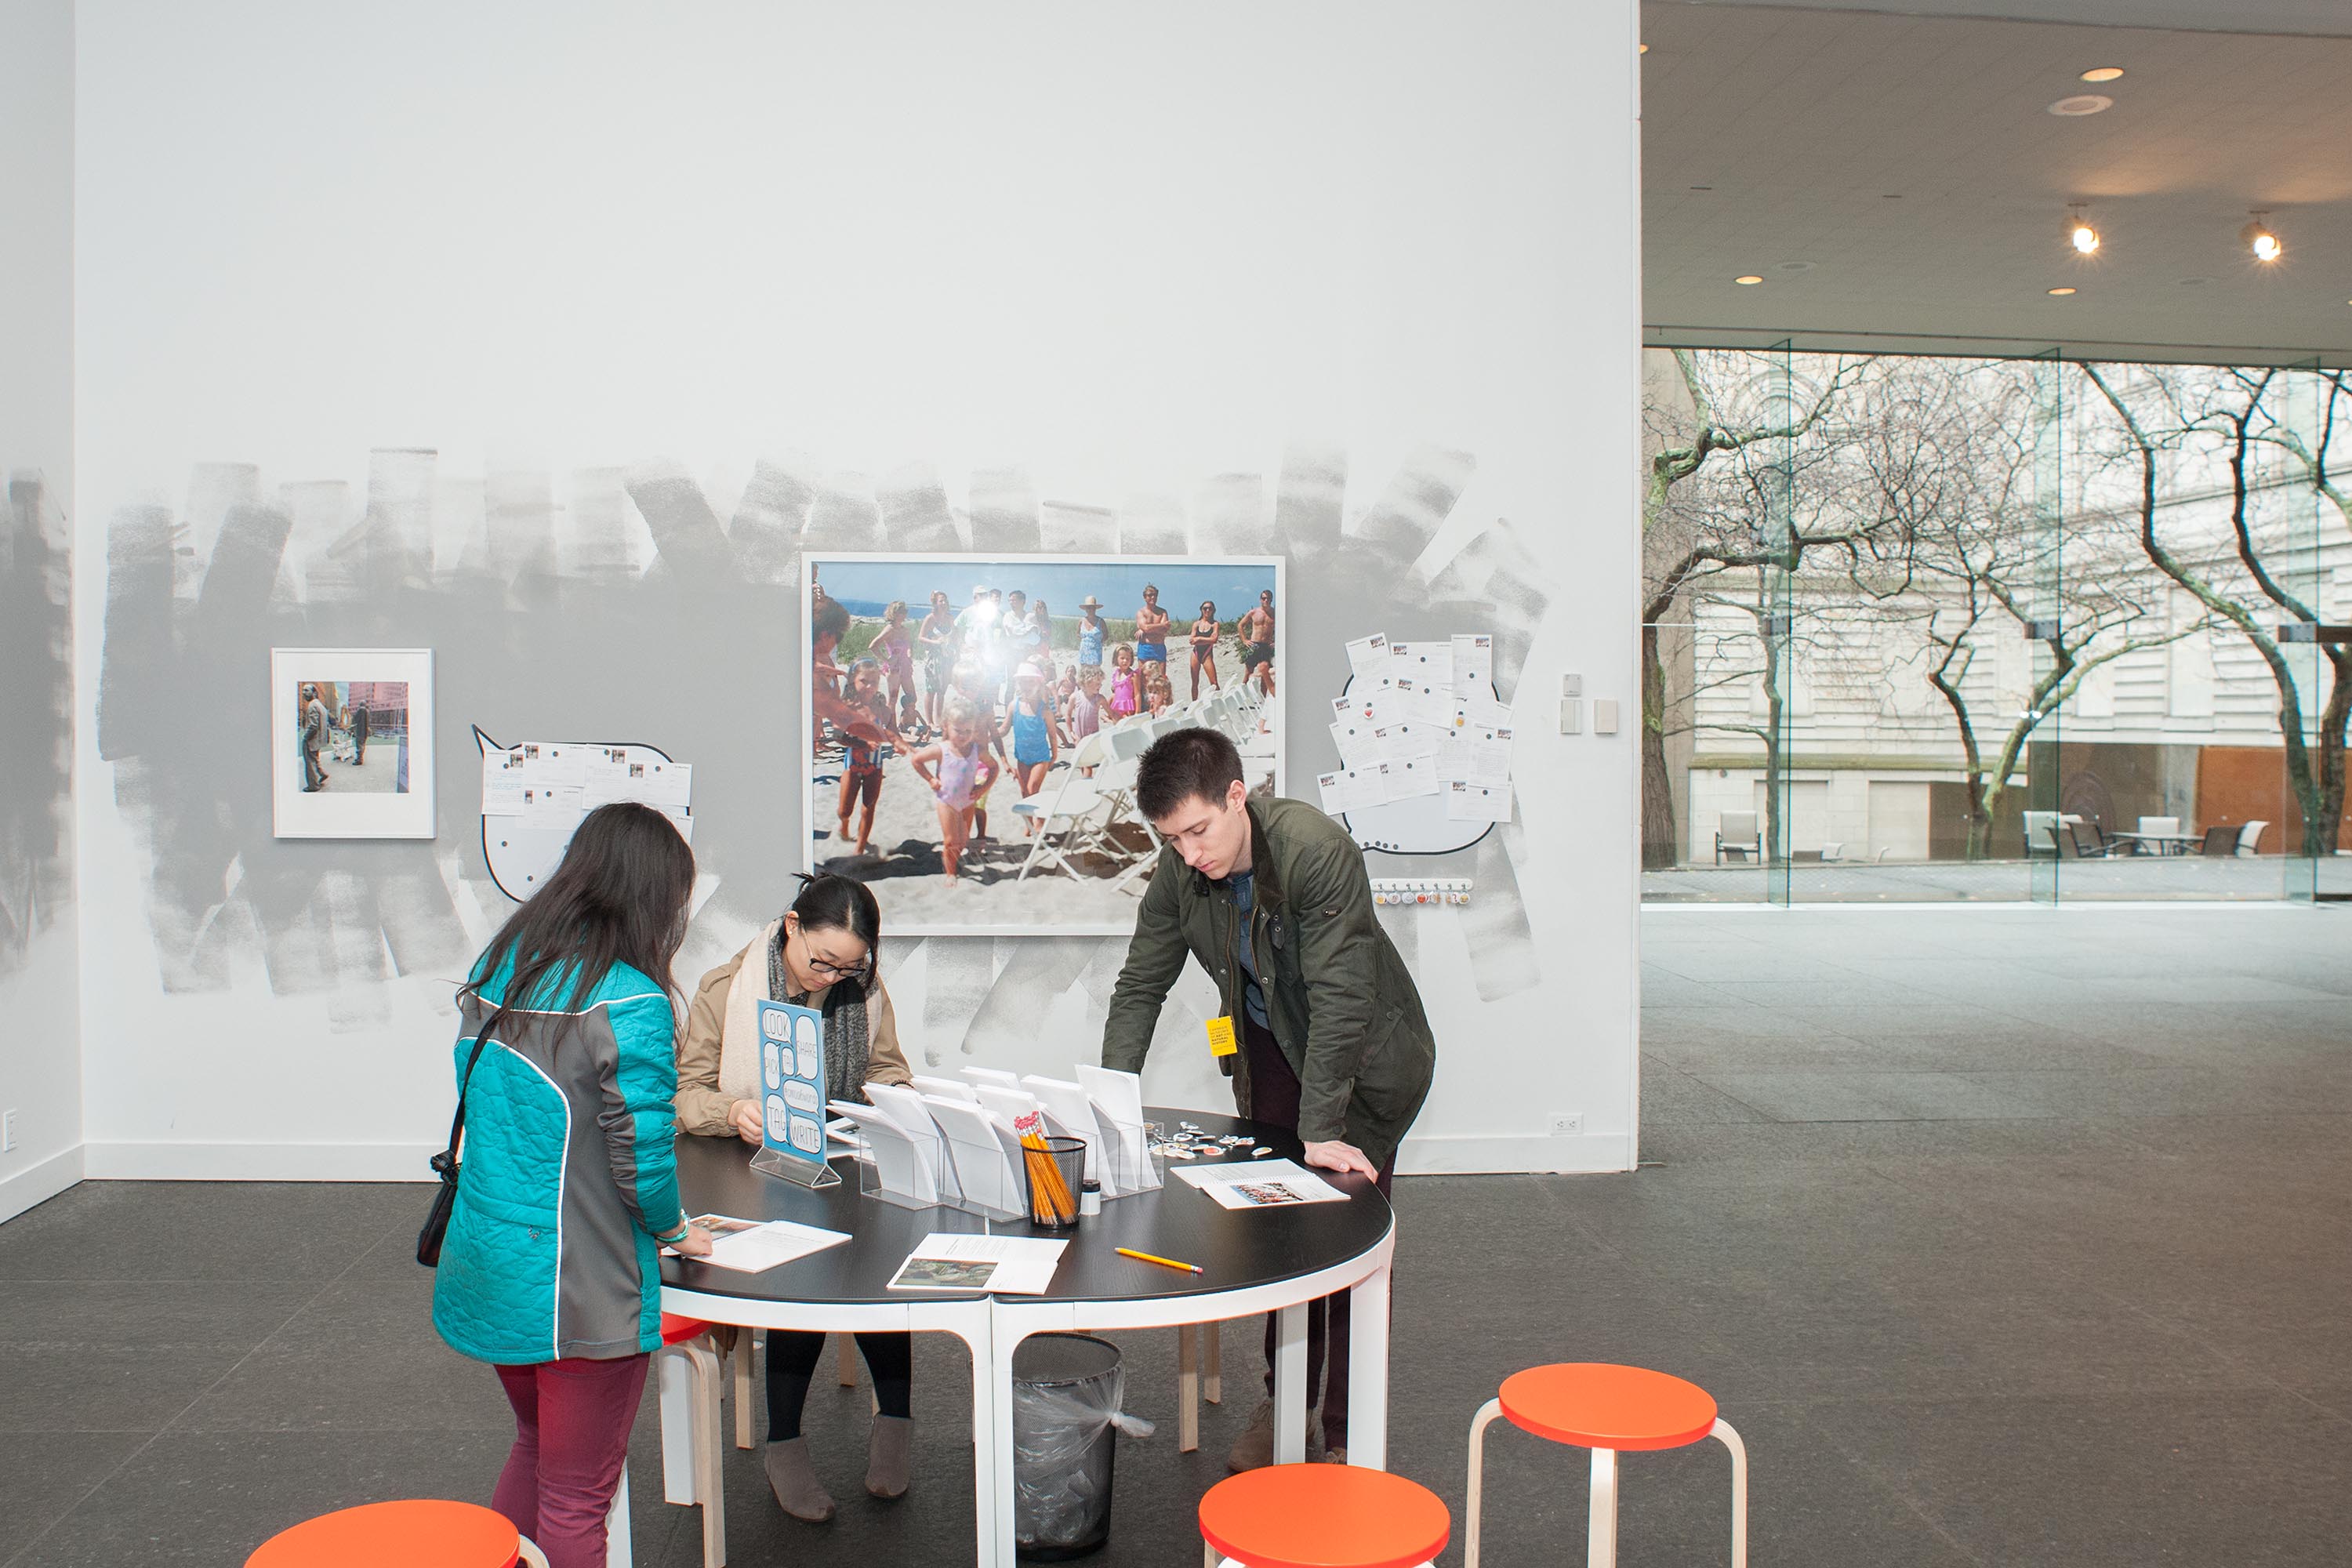 Installation view, “The Stories You Tell” at Carnegie Museum of Art, photo: Bryan Conley